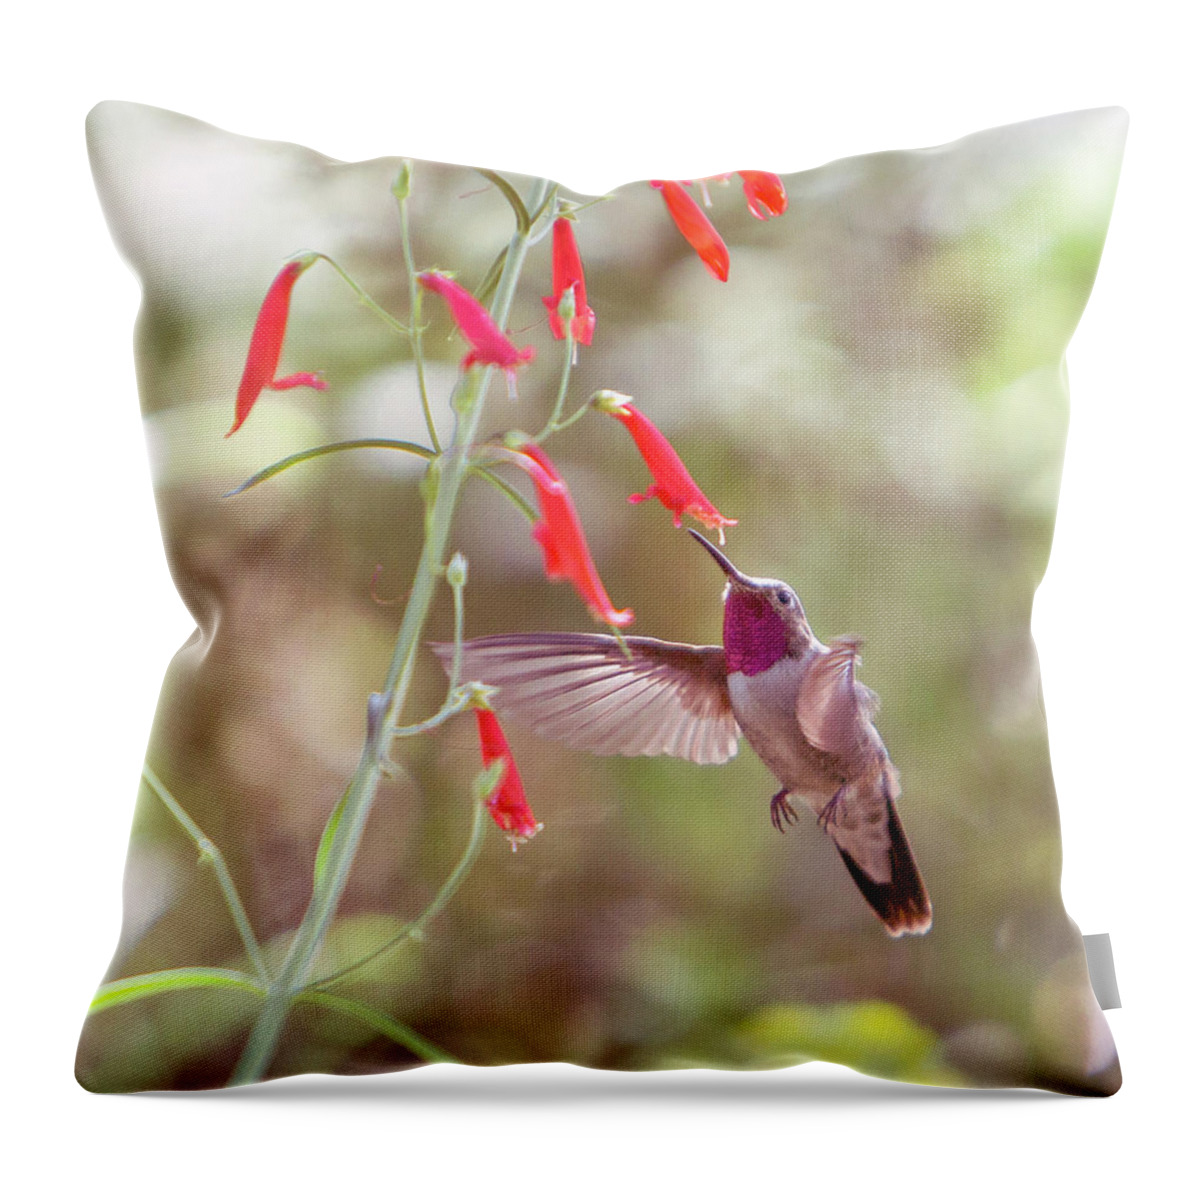 Hummingbird Throw Pillow featuring the photograph Humming Round The Little Red Flowers by Her Arts Desire